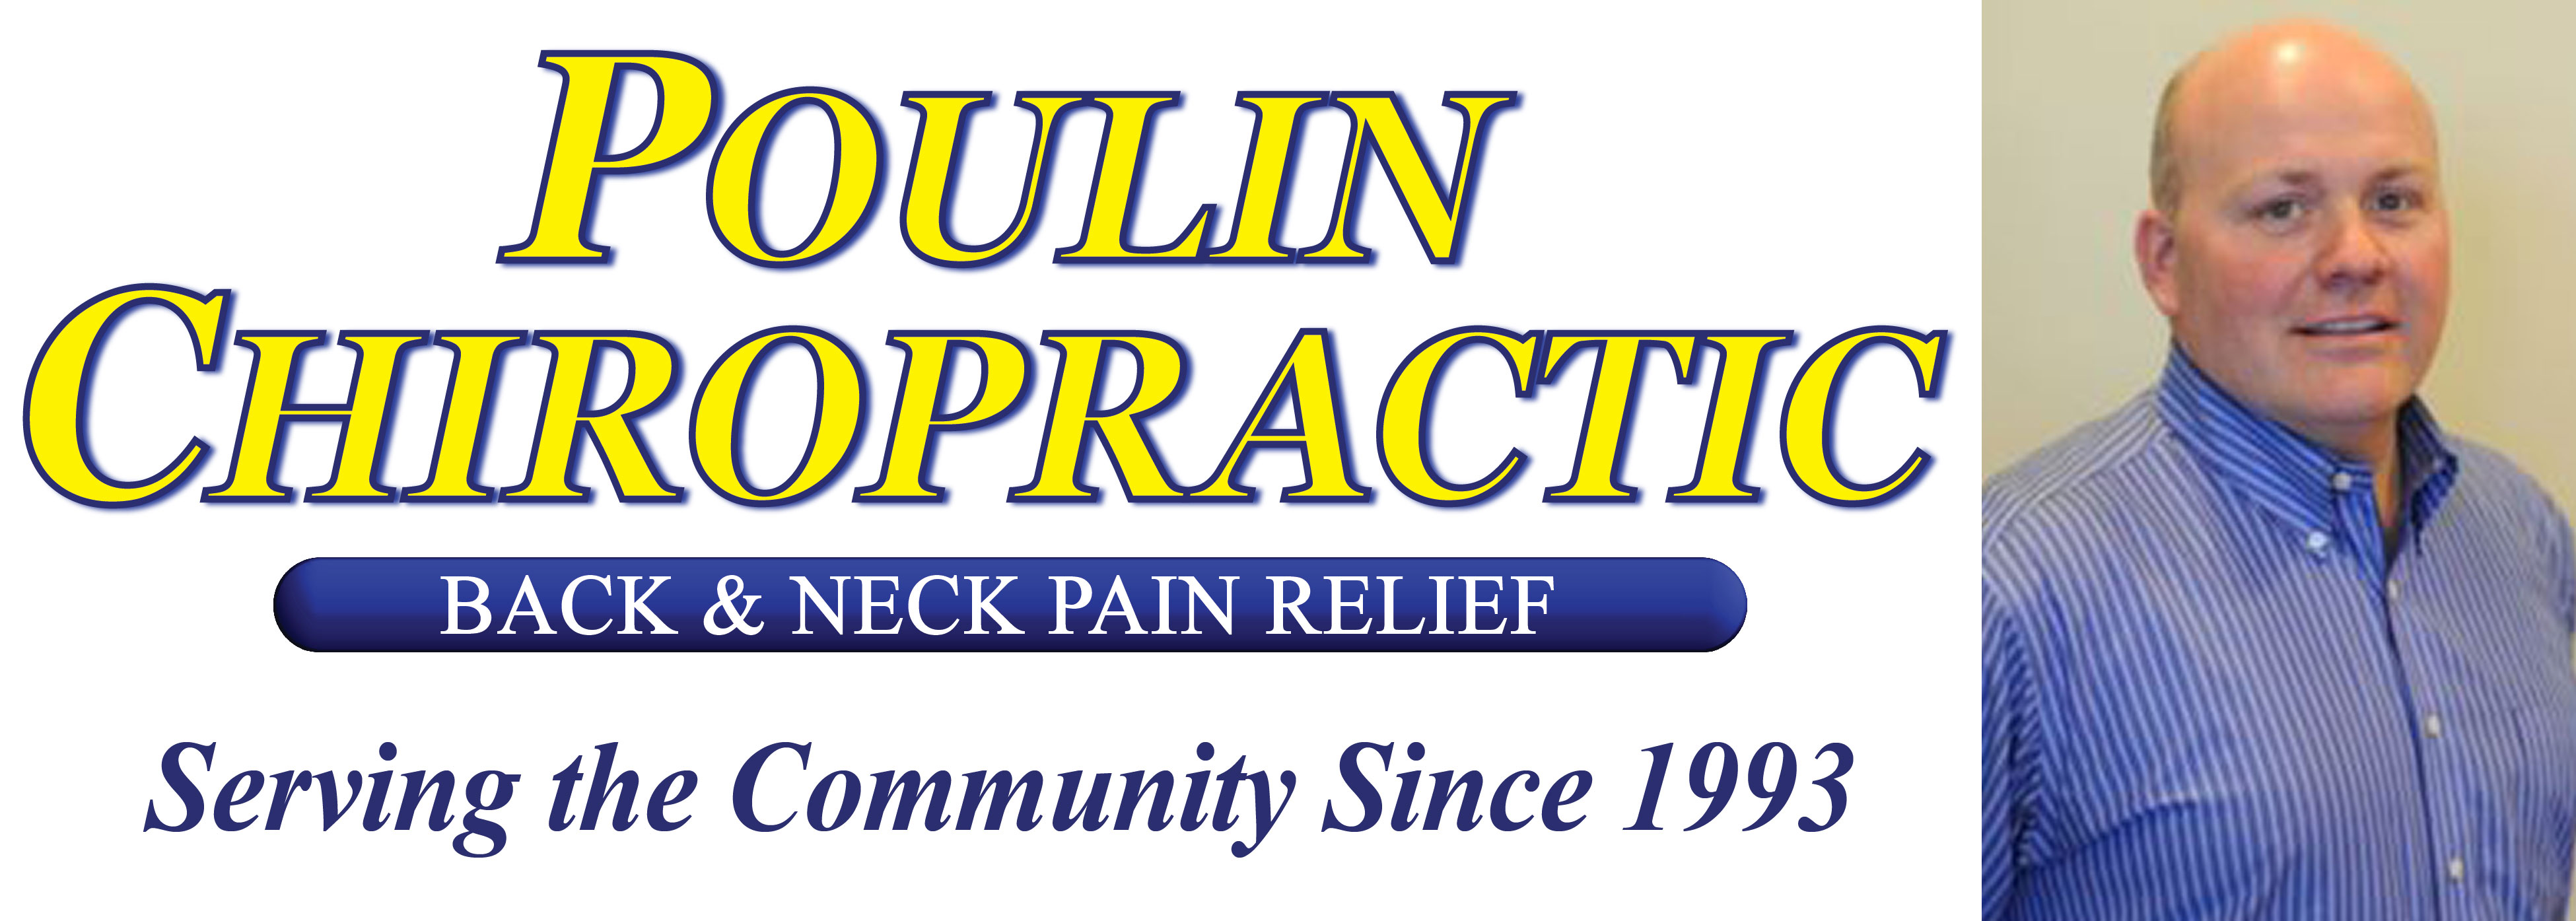 Poulin Chiropractic of Herndon and Ashburn